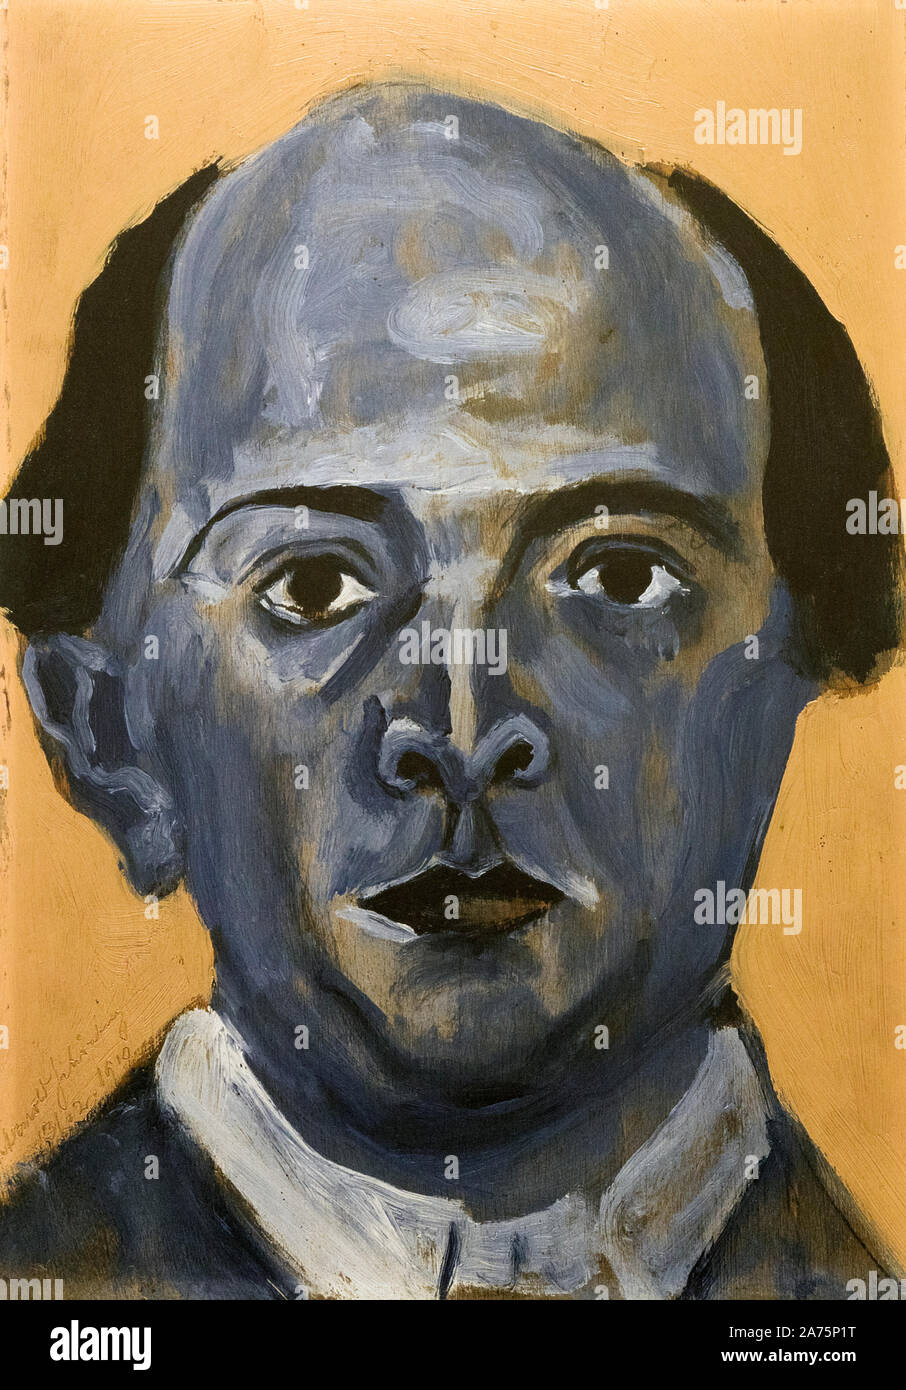 Arnold Schoenberg, Blue Self Portrait.  Arnold Schoenberg, 1874 - 1951.  Austrian born American composer and artist. Exhibited in the Malaga branch of Stock Photo